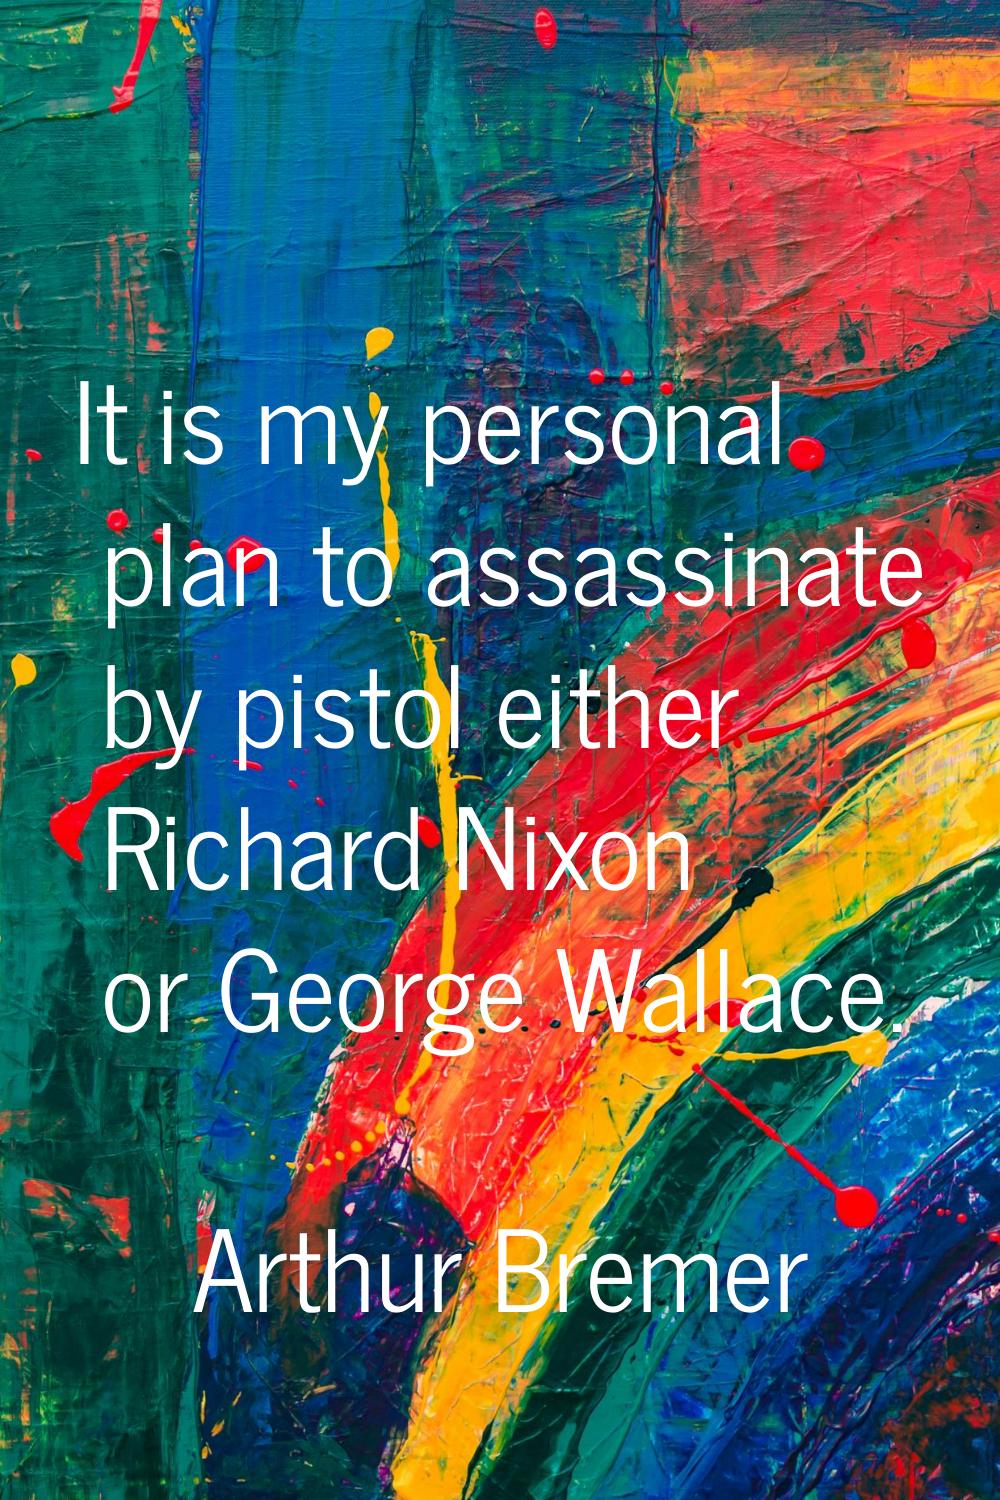 It is my personal plan to assassinate by pistol either Richard Nixon or George Wallace.